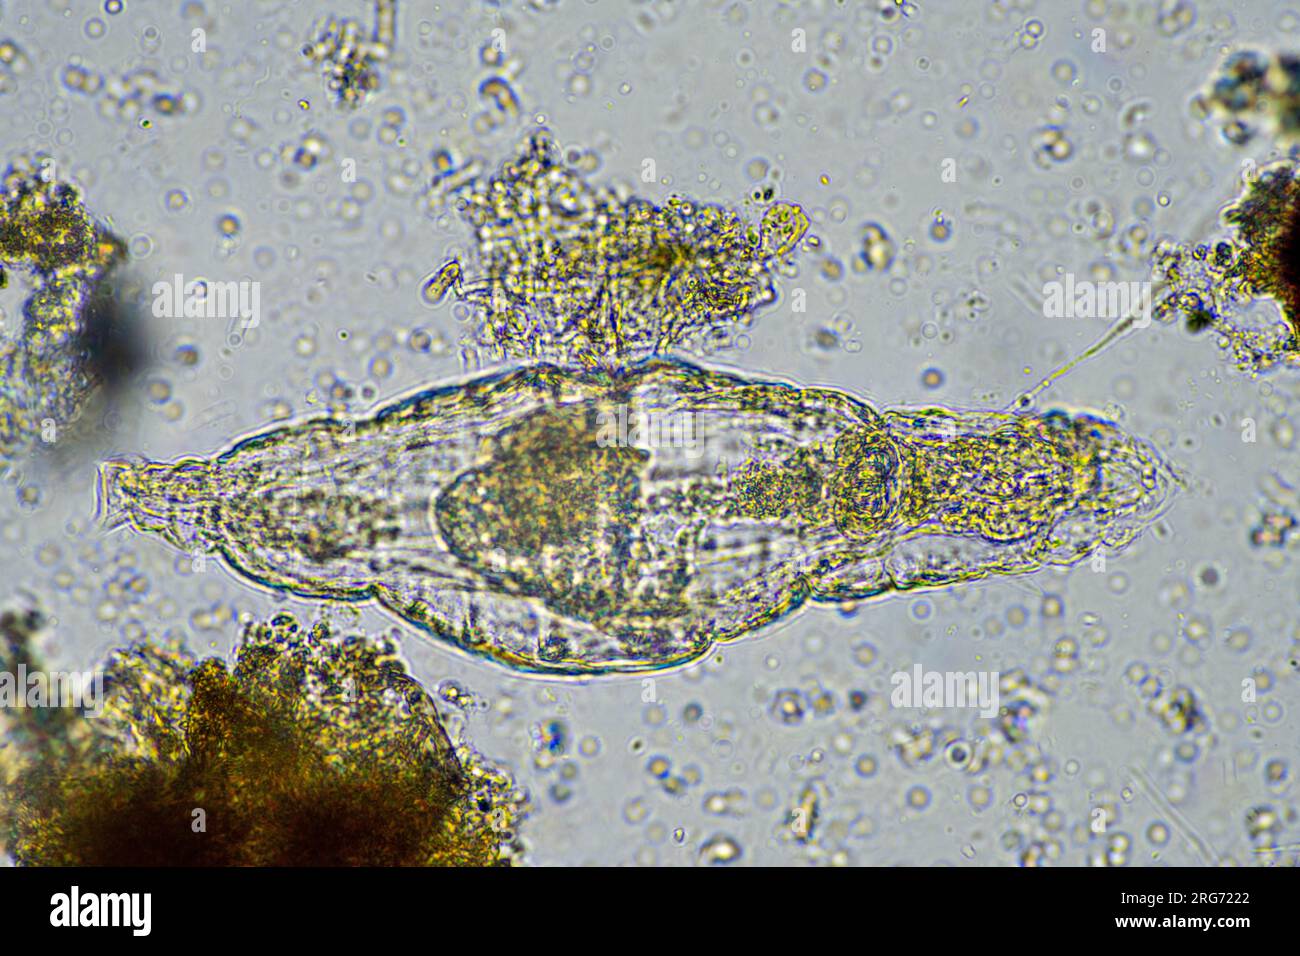 rotifer in a soil sample from a lake Stock Photo